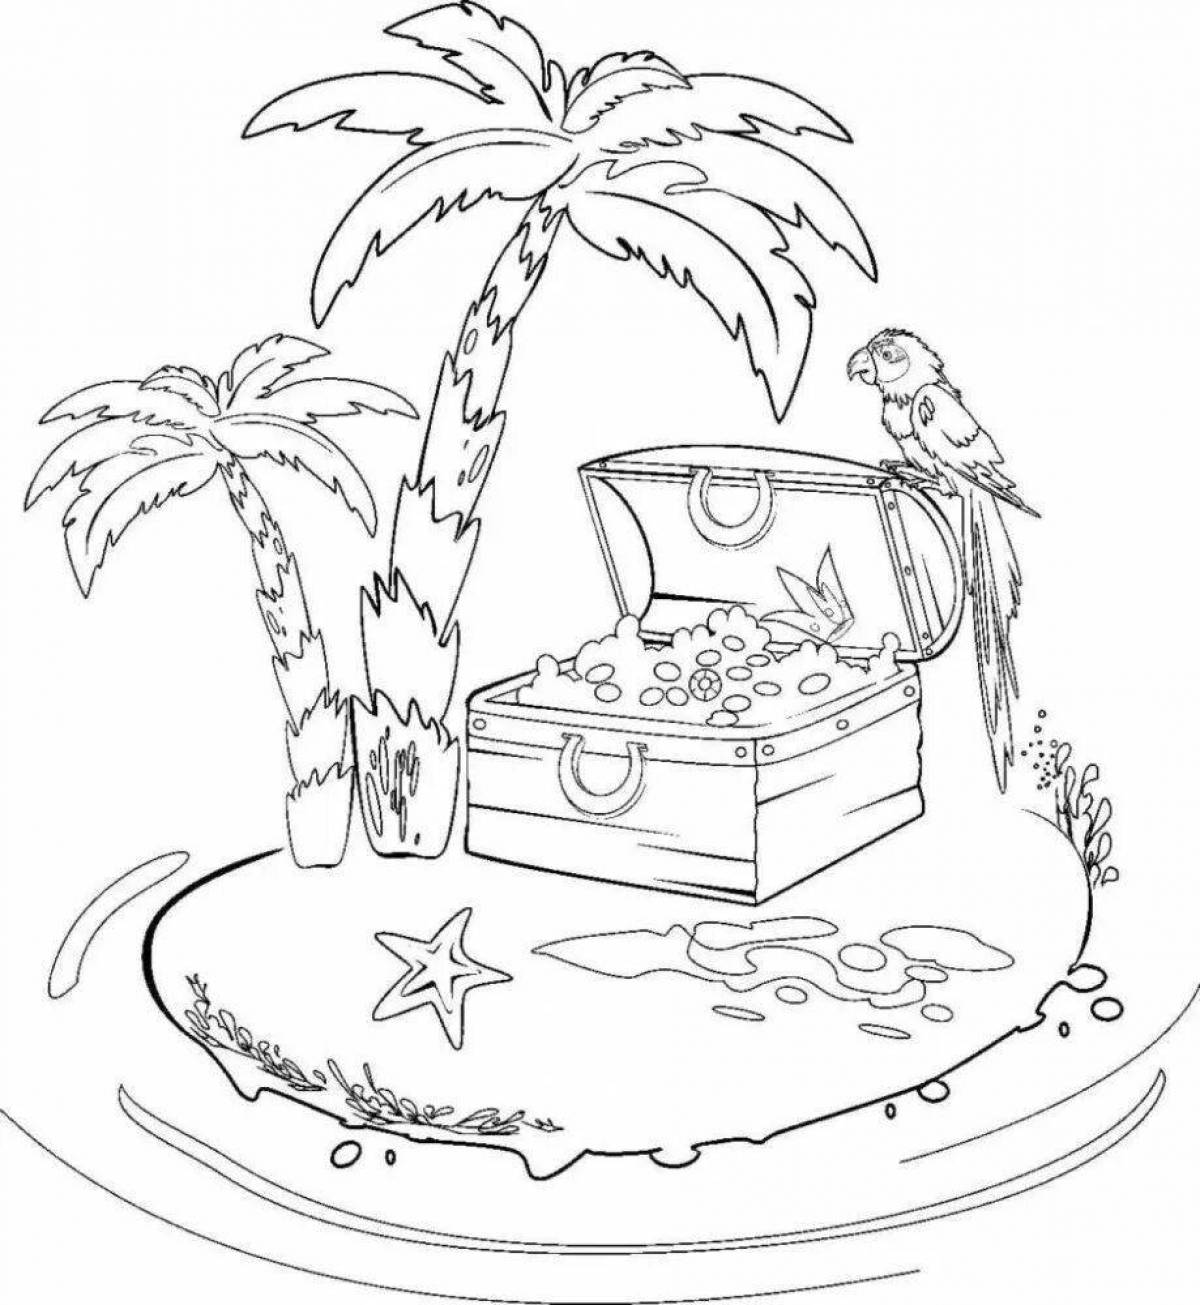 Playful desert island coloring page